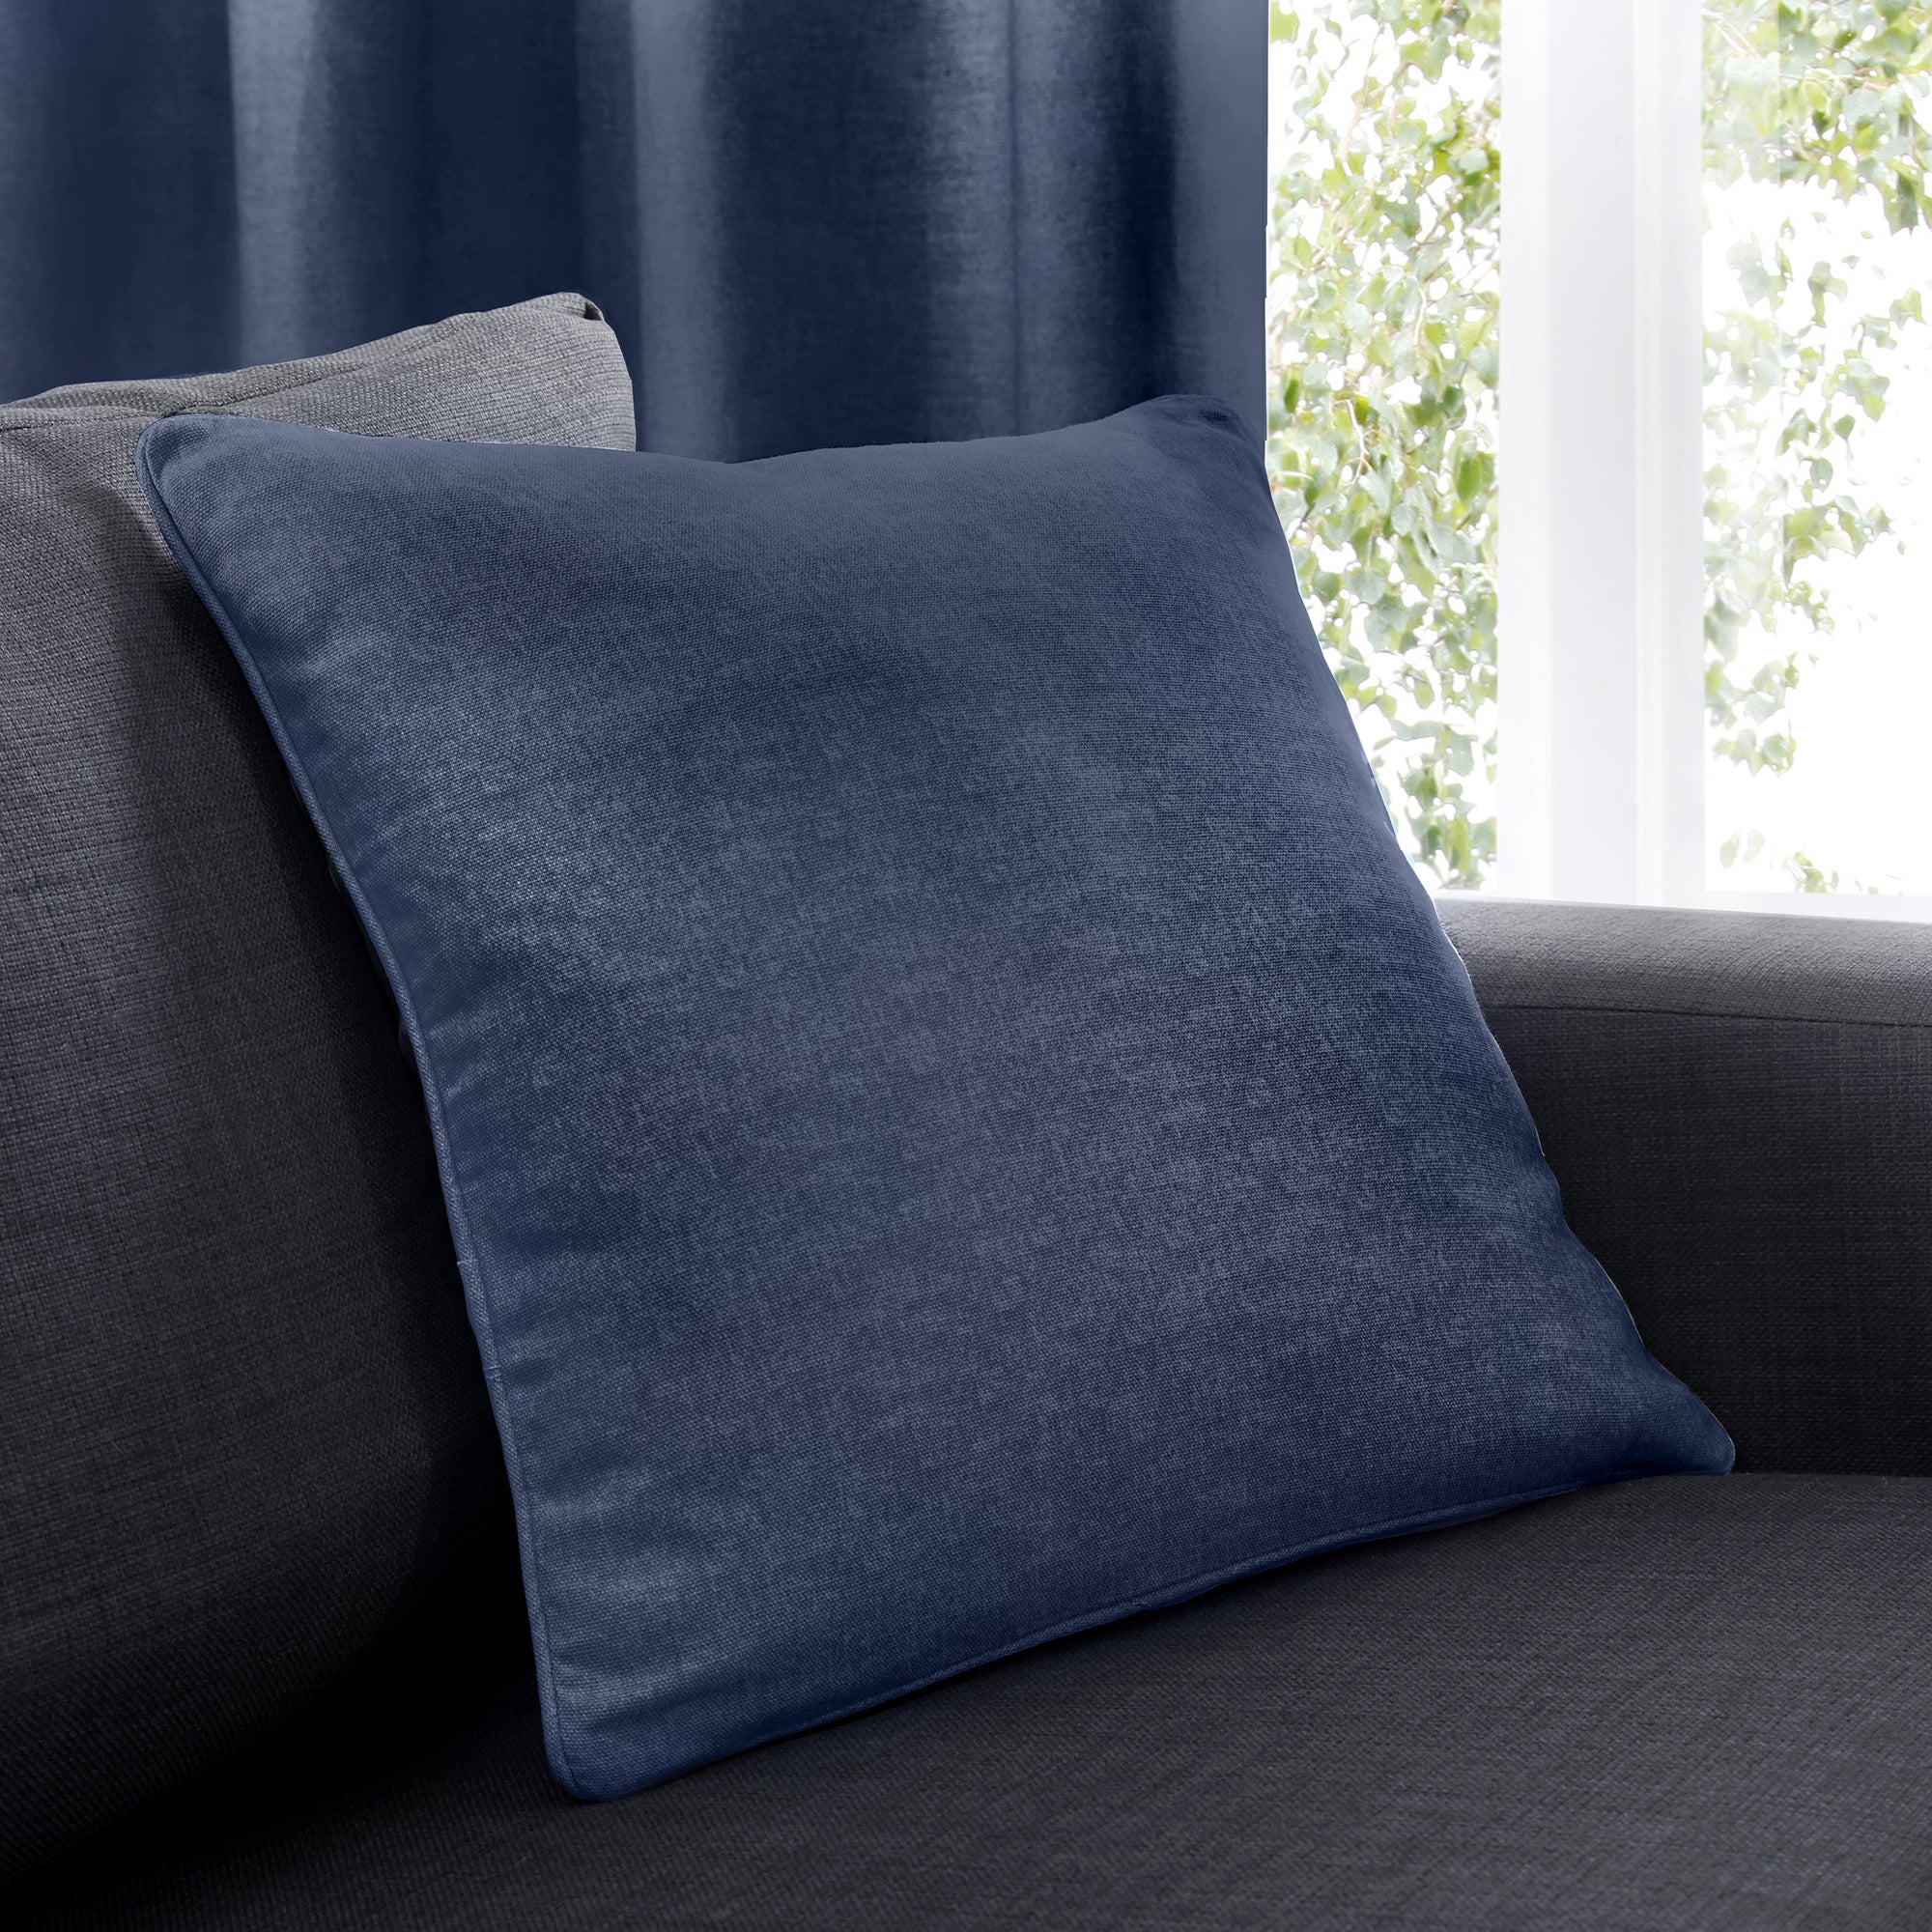 Sorbonne - 100% Cotton Filled Cushion in Navy - by Fusion